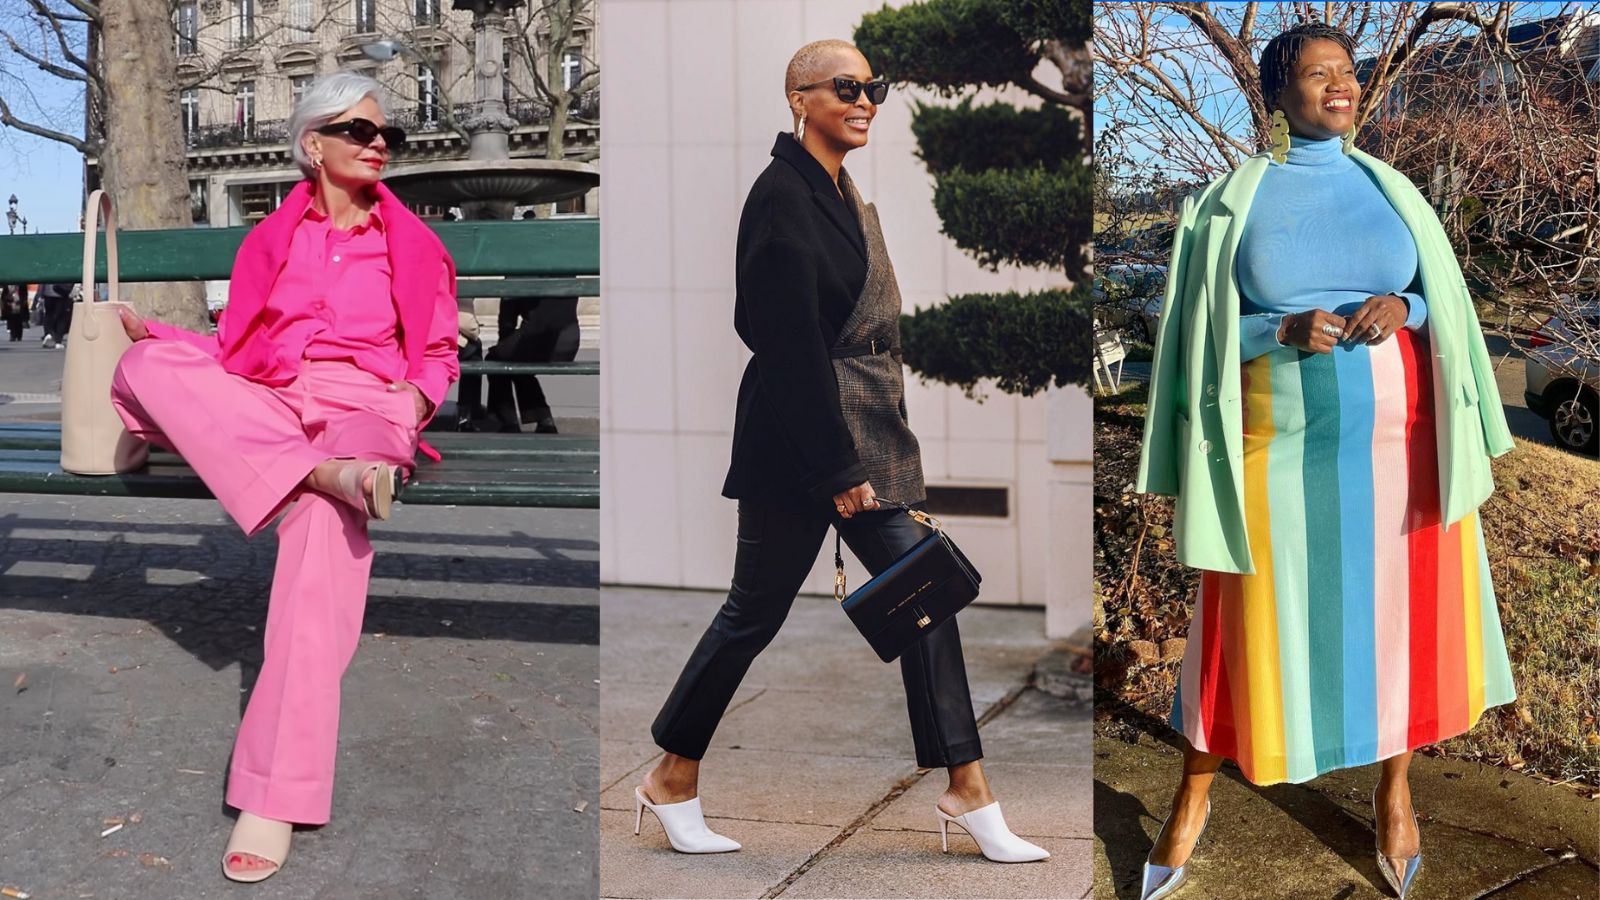 Grece Ghanem Is a Fashion Influencer With Actual Influence